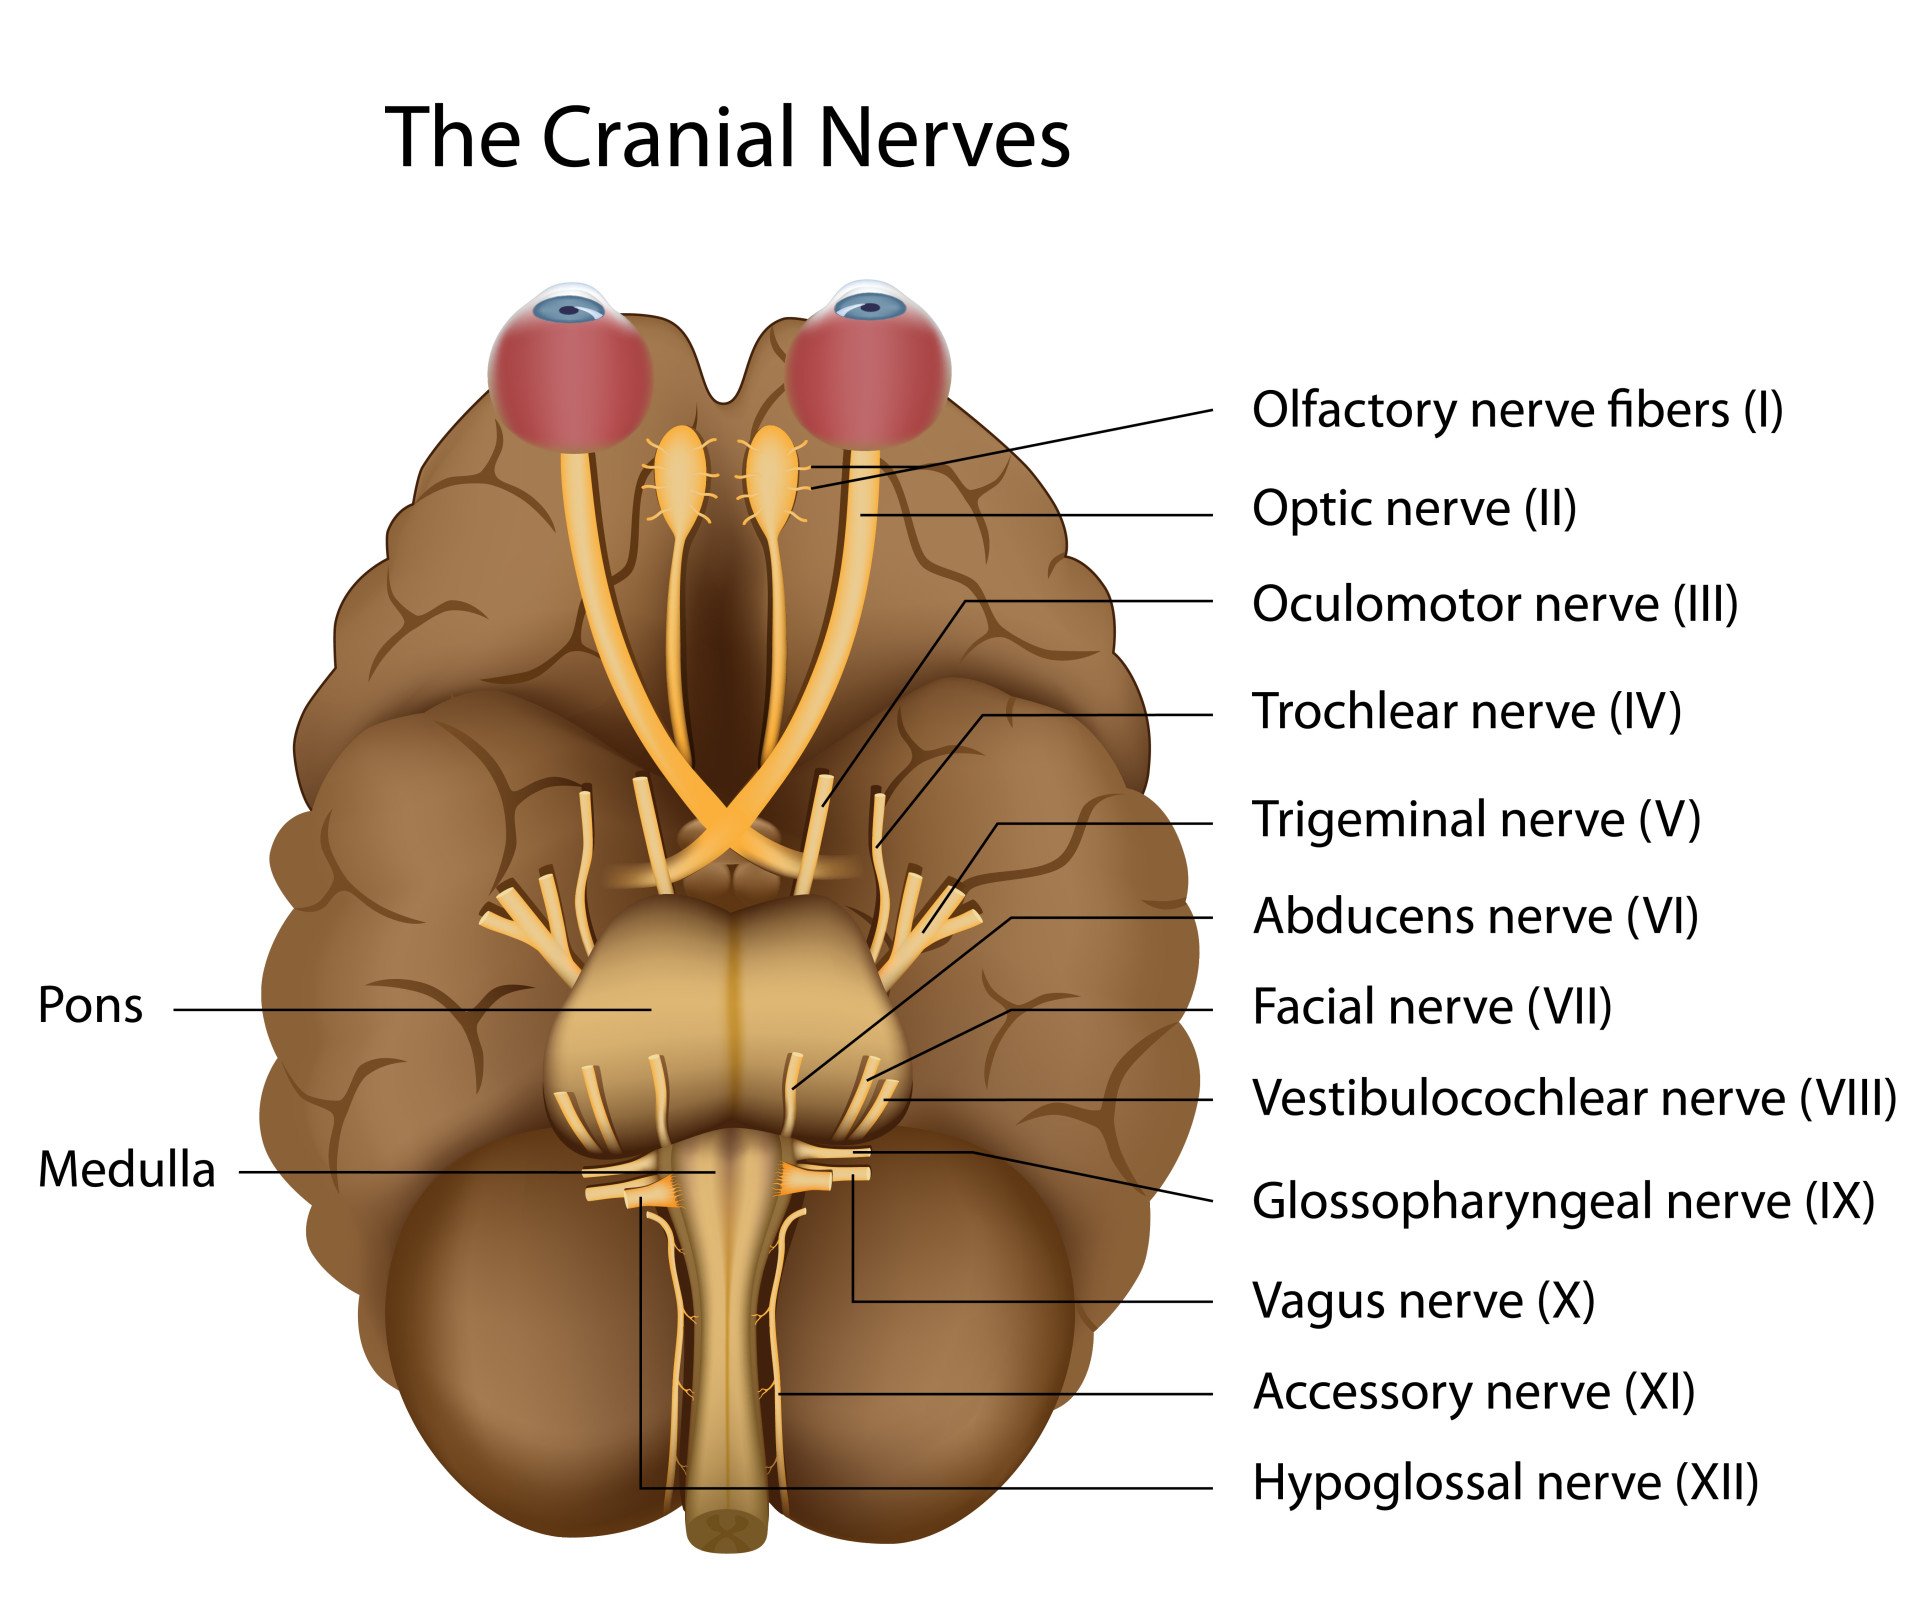 The 12 cranial nerves